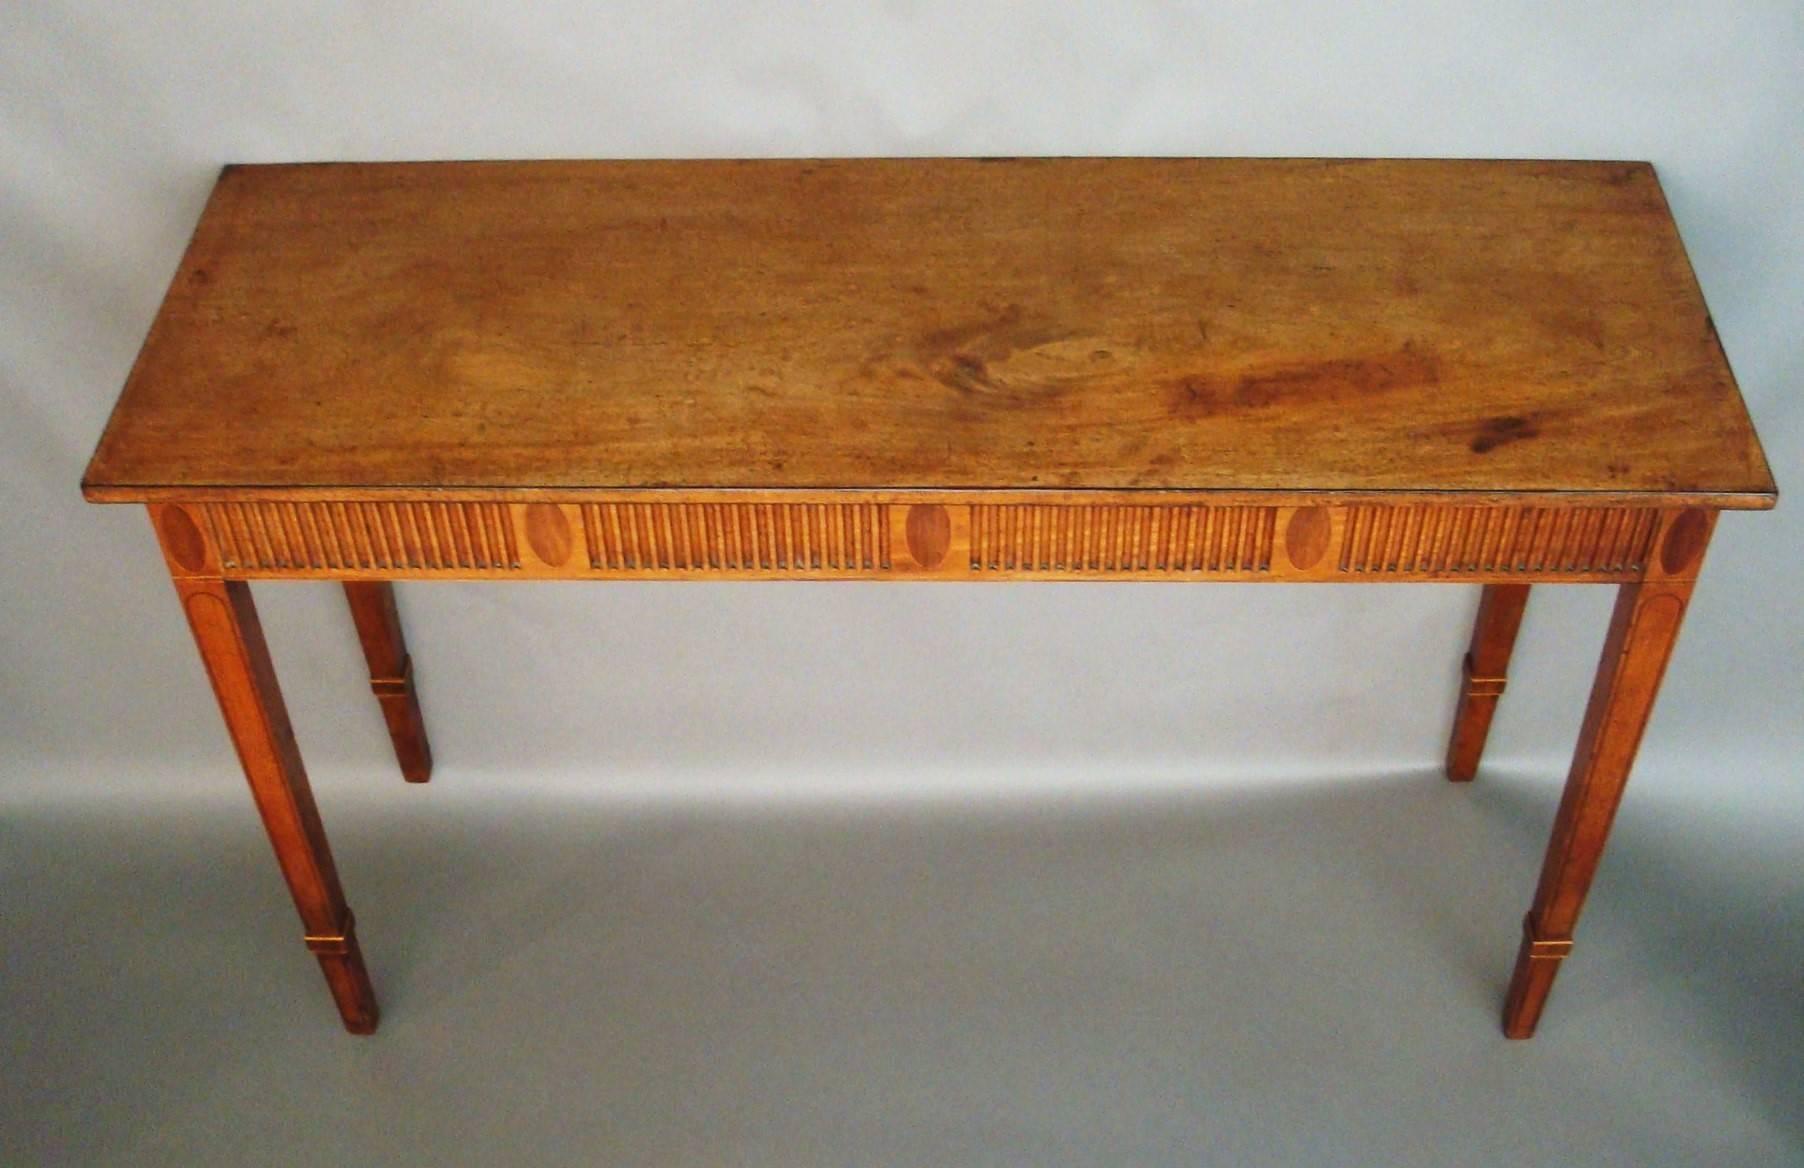 A good George III mahogany neoclassical console table or side table of elegant proportions; the figured rectangular top with an ebony strung edge, raised on a fluted frieze separated by oval inlaid panels, repeated on the sides. Standing on square